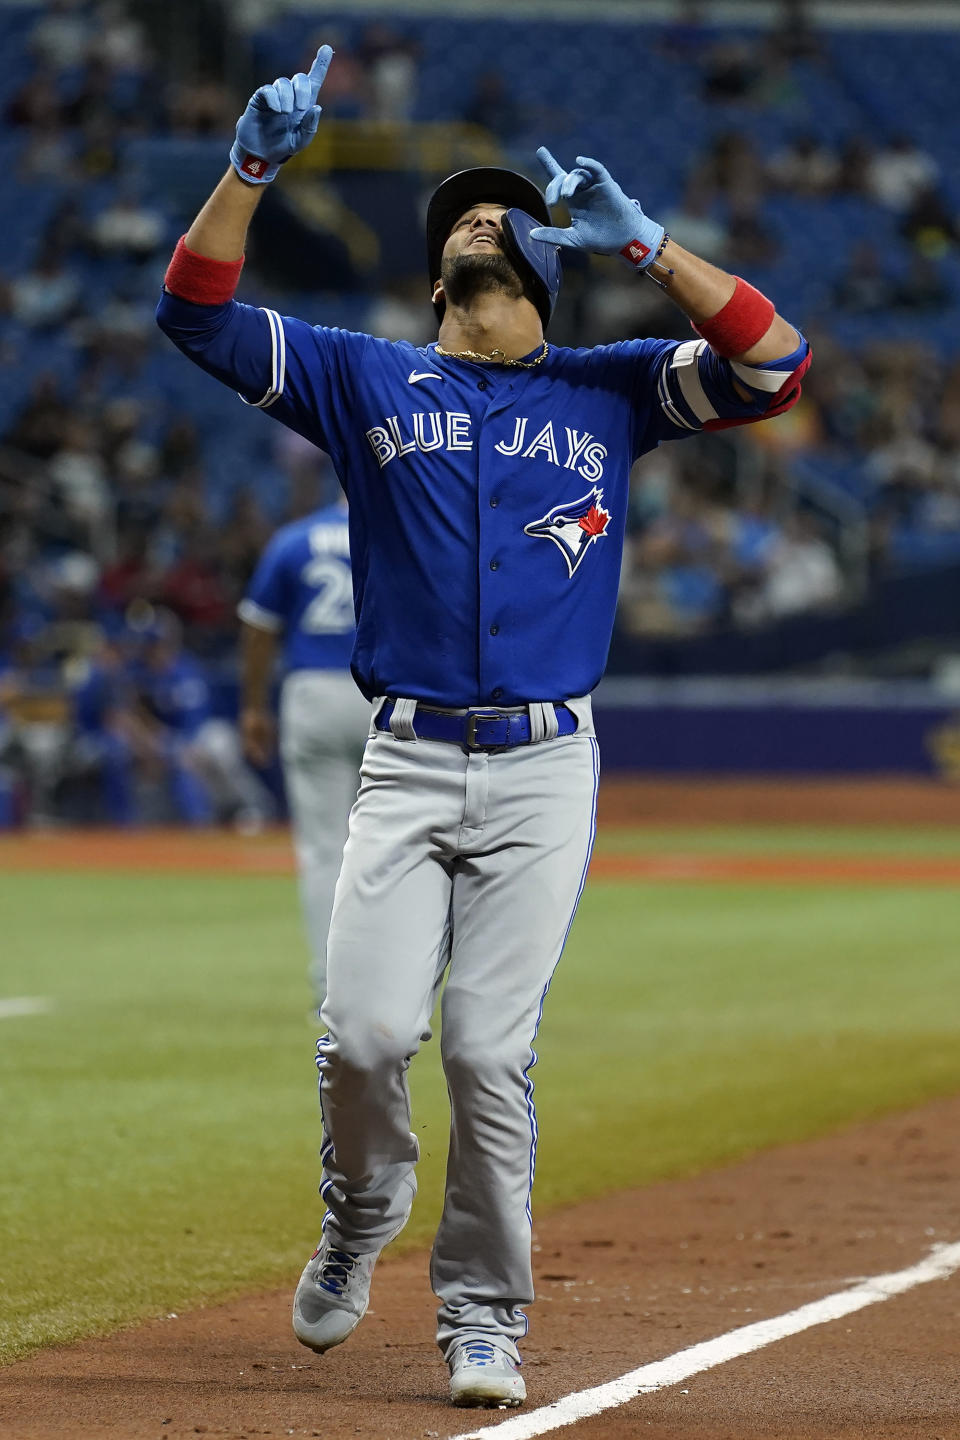 Toronto Blue Jays' Lourdes Gurriel Jr. celebrates his solo home run off Tampa Bay Rays' Drew Rasmussen during the fifth inning of a baseball game Tuesday, Sept. 21, 2021, in St. Petersburg, Fla. (AP Photo/Chris O'Meara)